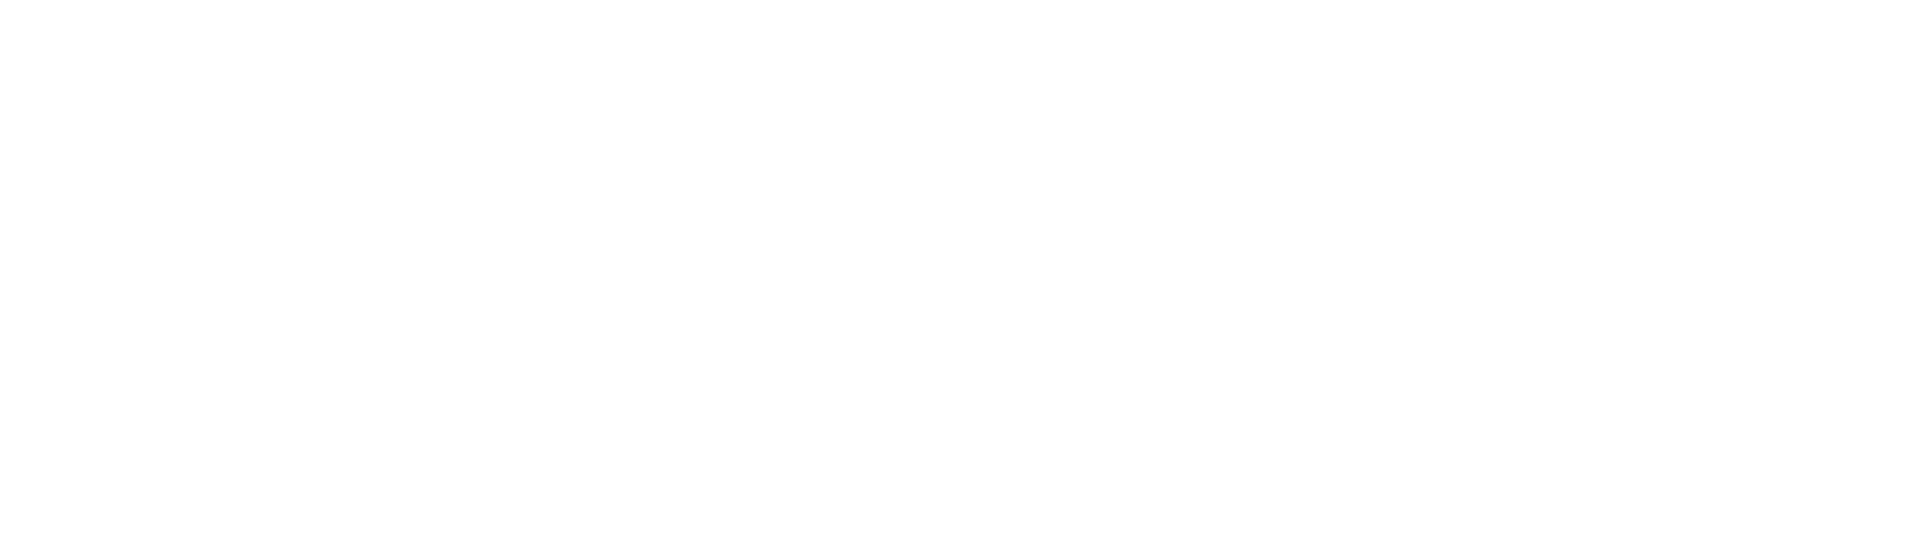 23fw 2nd top text